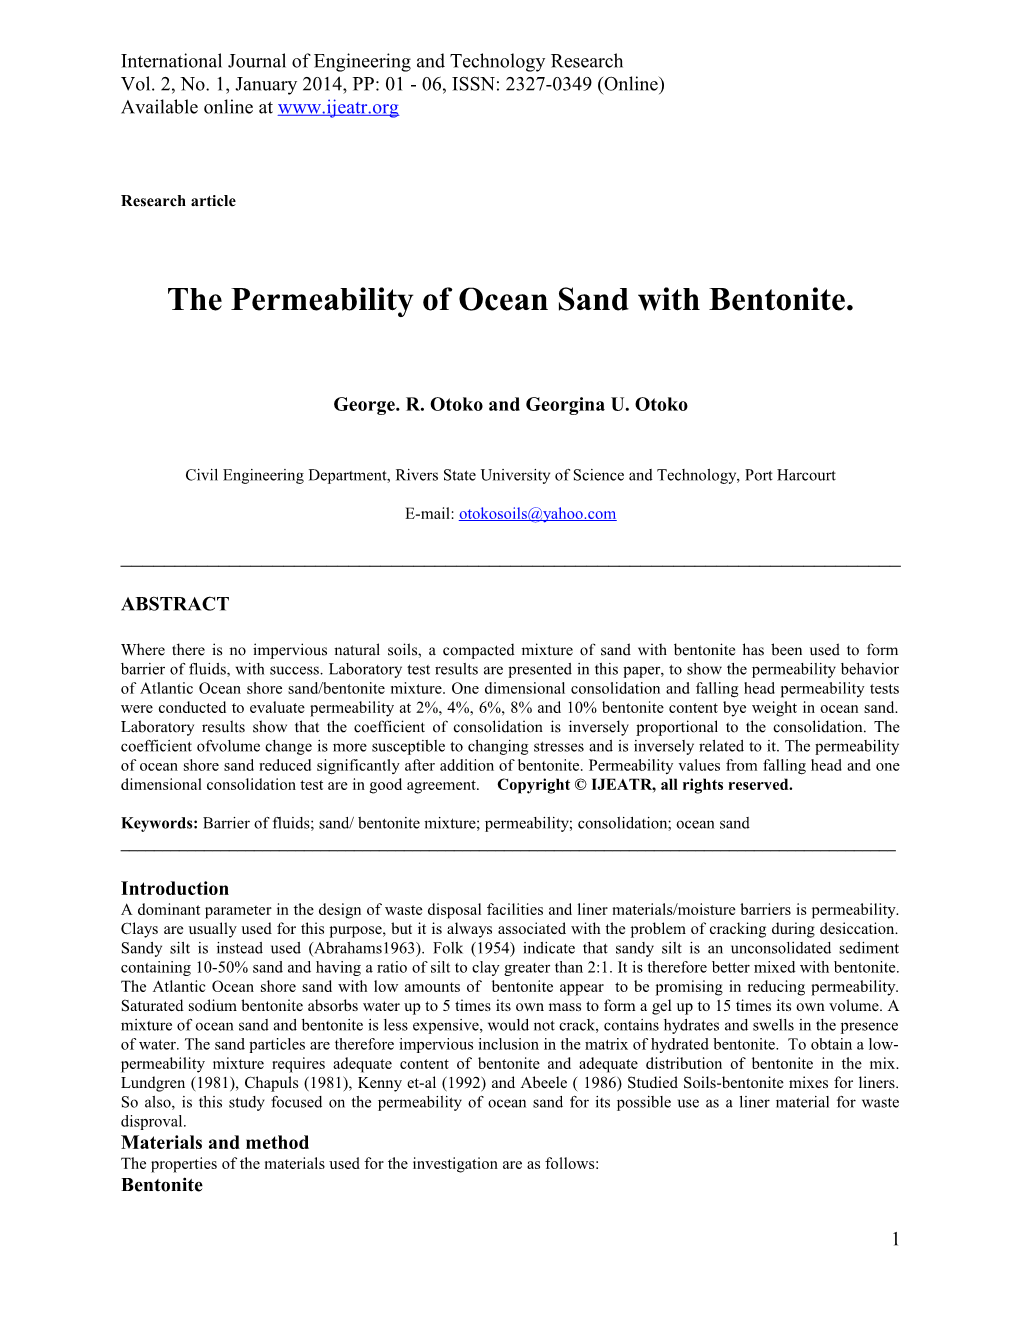 The Permeability of Ocean Sand with Bentonite